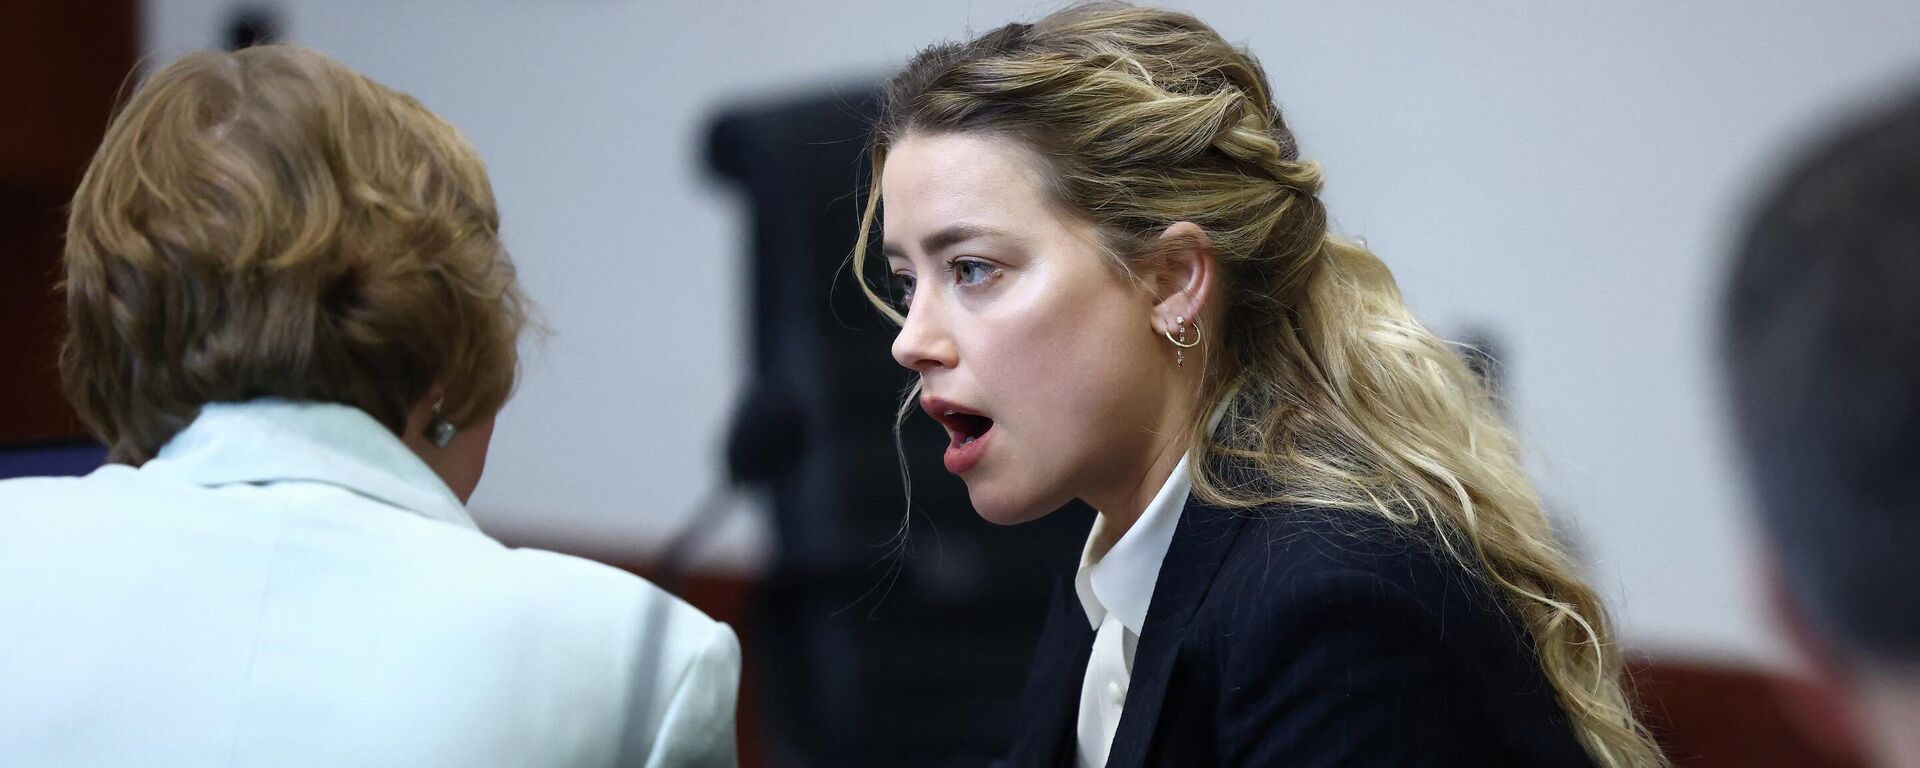 Actress Amber Heard speaks to her attorney during the defamation trial against her at the Fairfax County Circuit Courthouse in Fairfax, Virginia, April 21, 2022 - Sputnik International, 1920, 02.05.2022